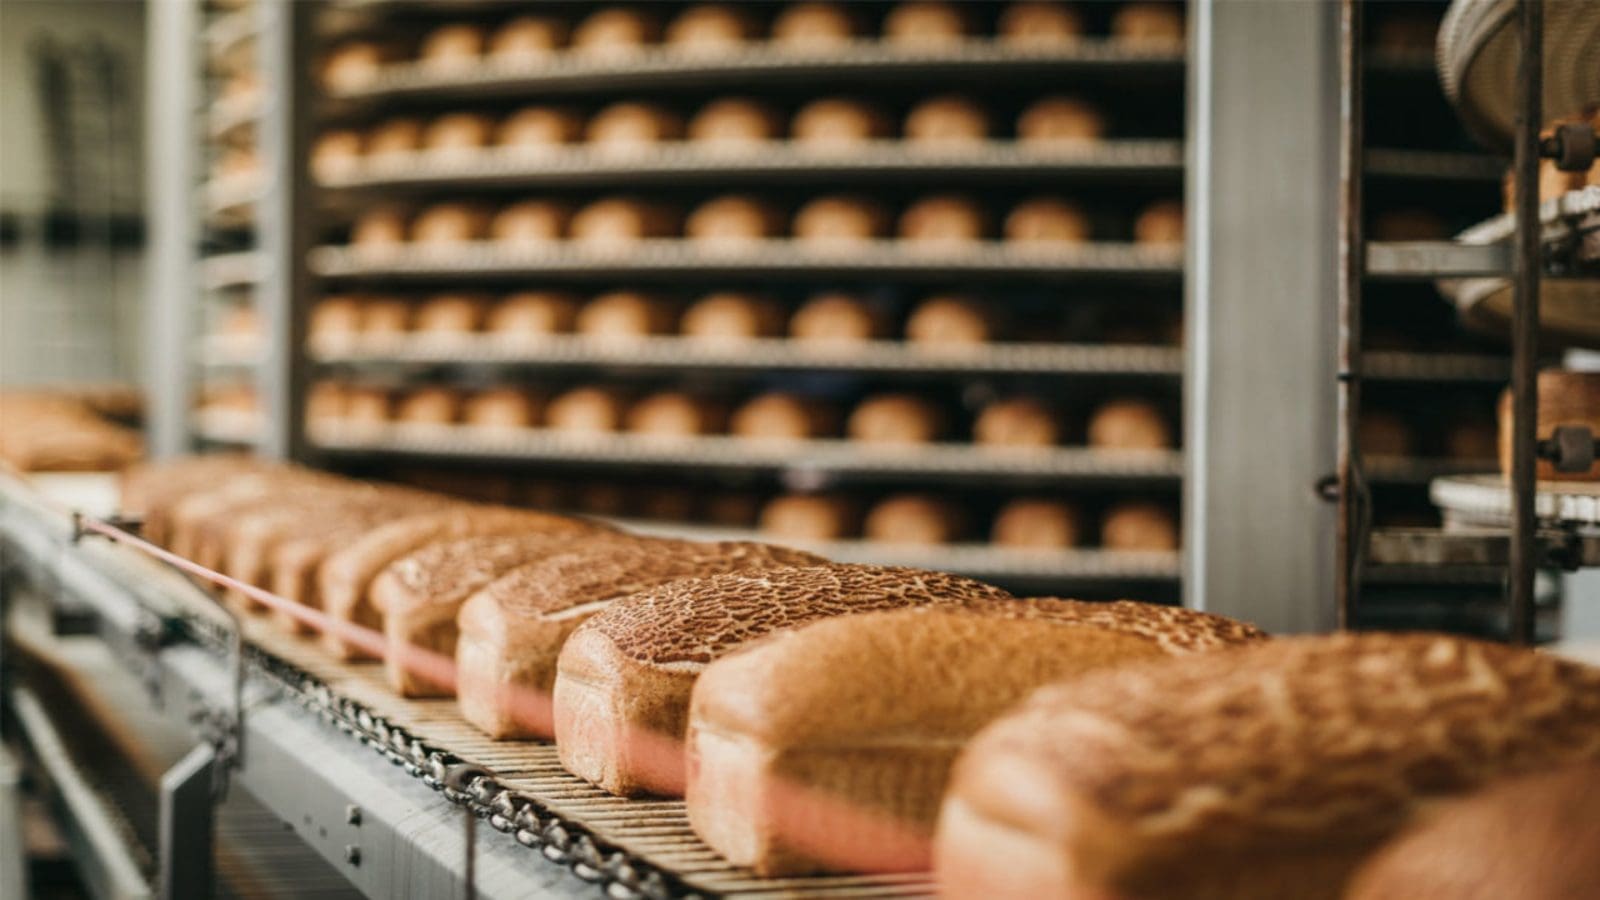 Puratos leverages digital tools to help bakers cut environmental impact, Kerry saves 34.5 billion loaves of bread annually